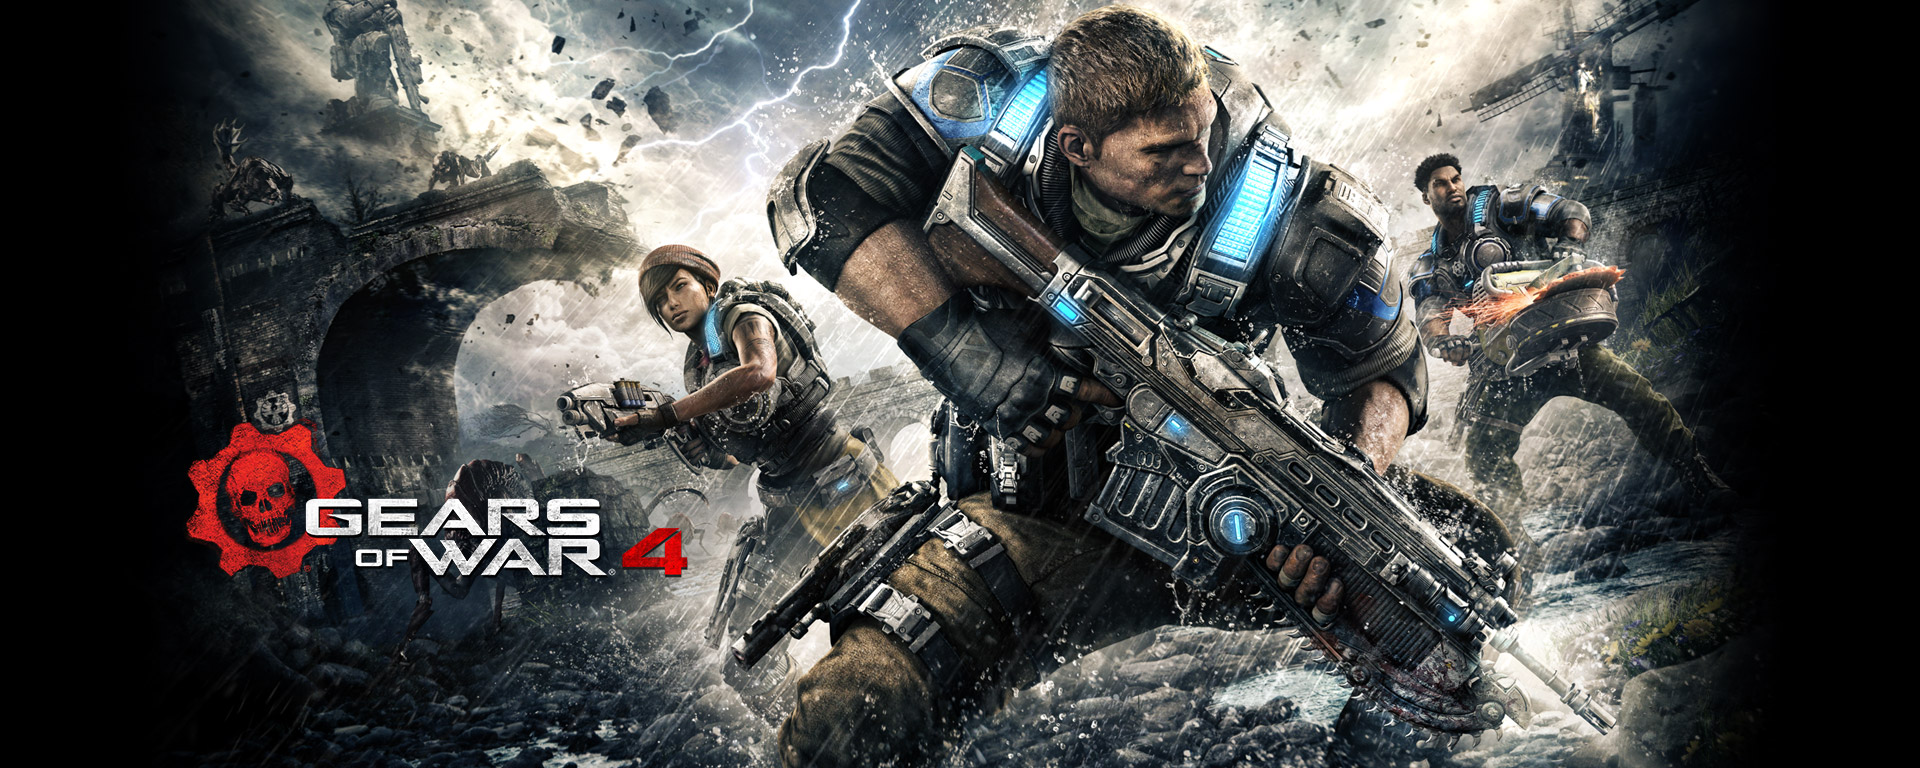 download gears of war 4 xbox for free